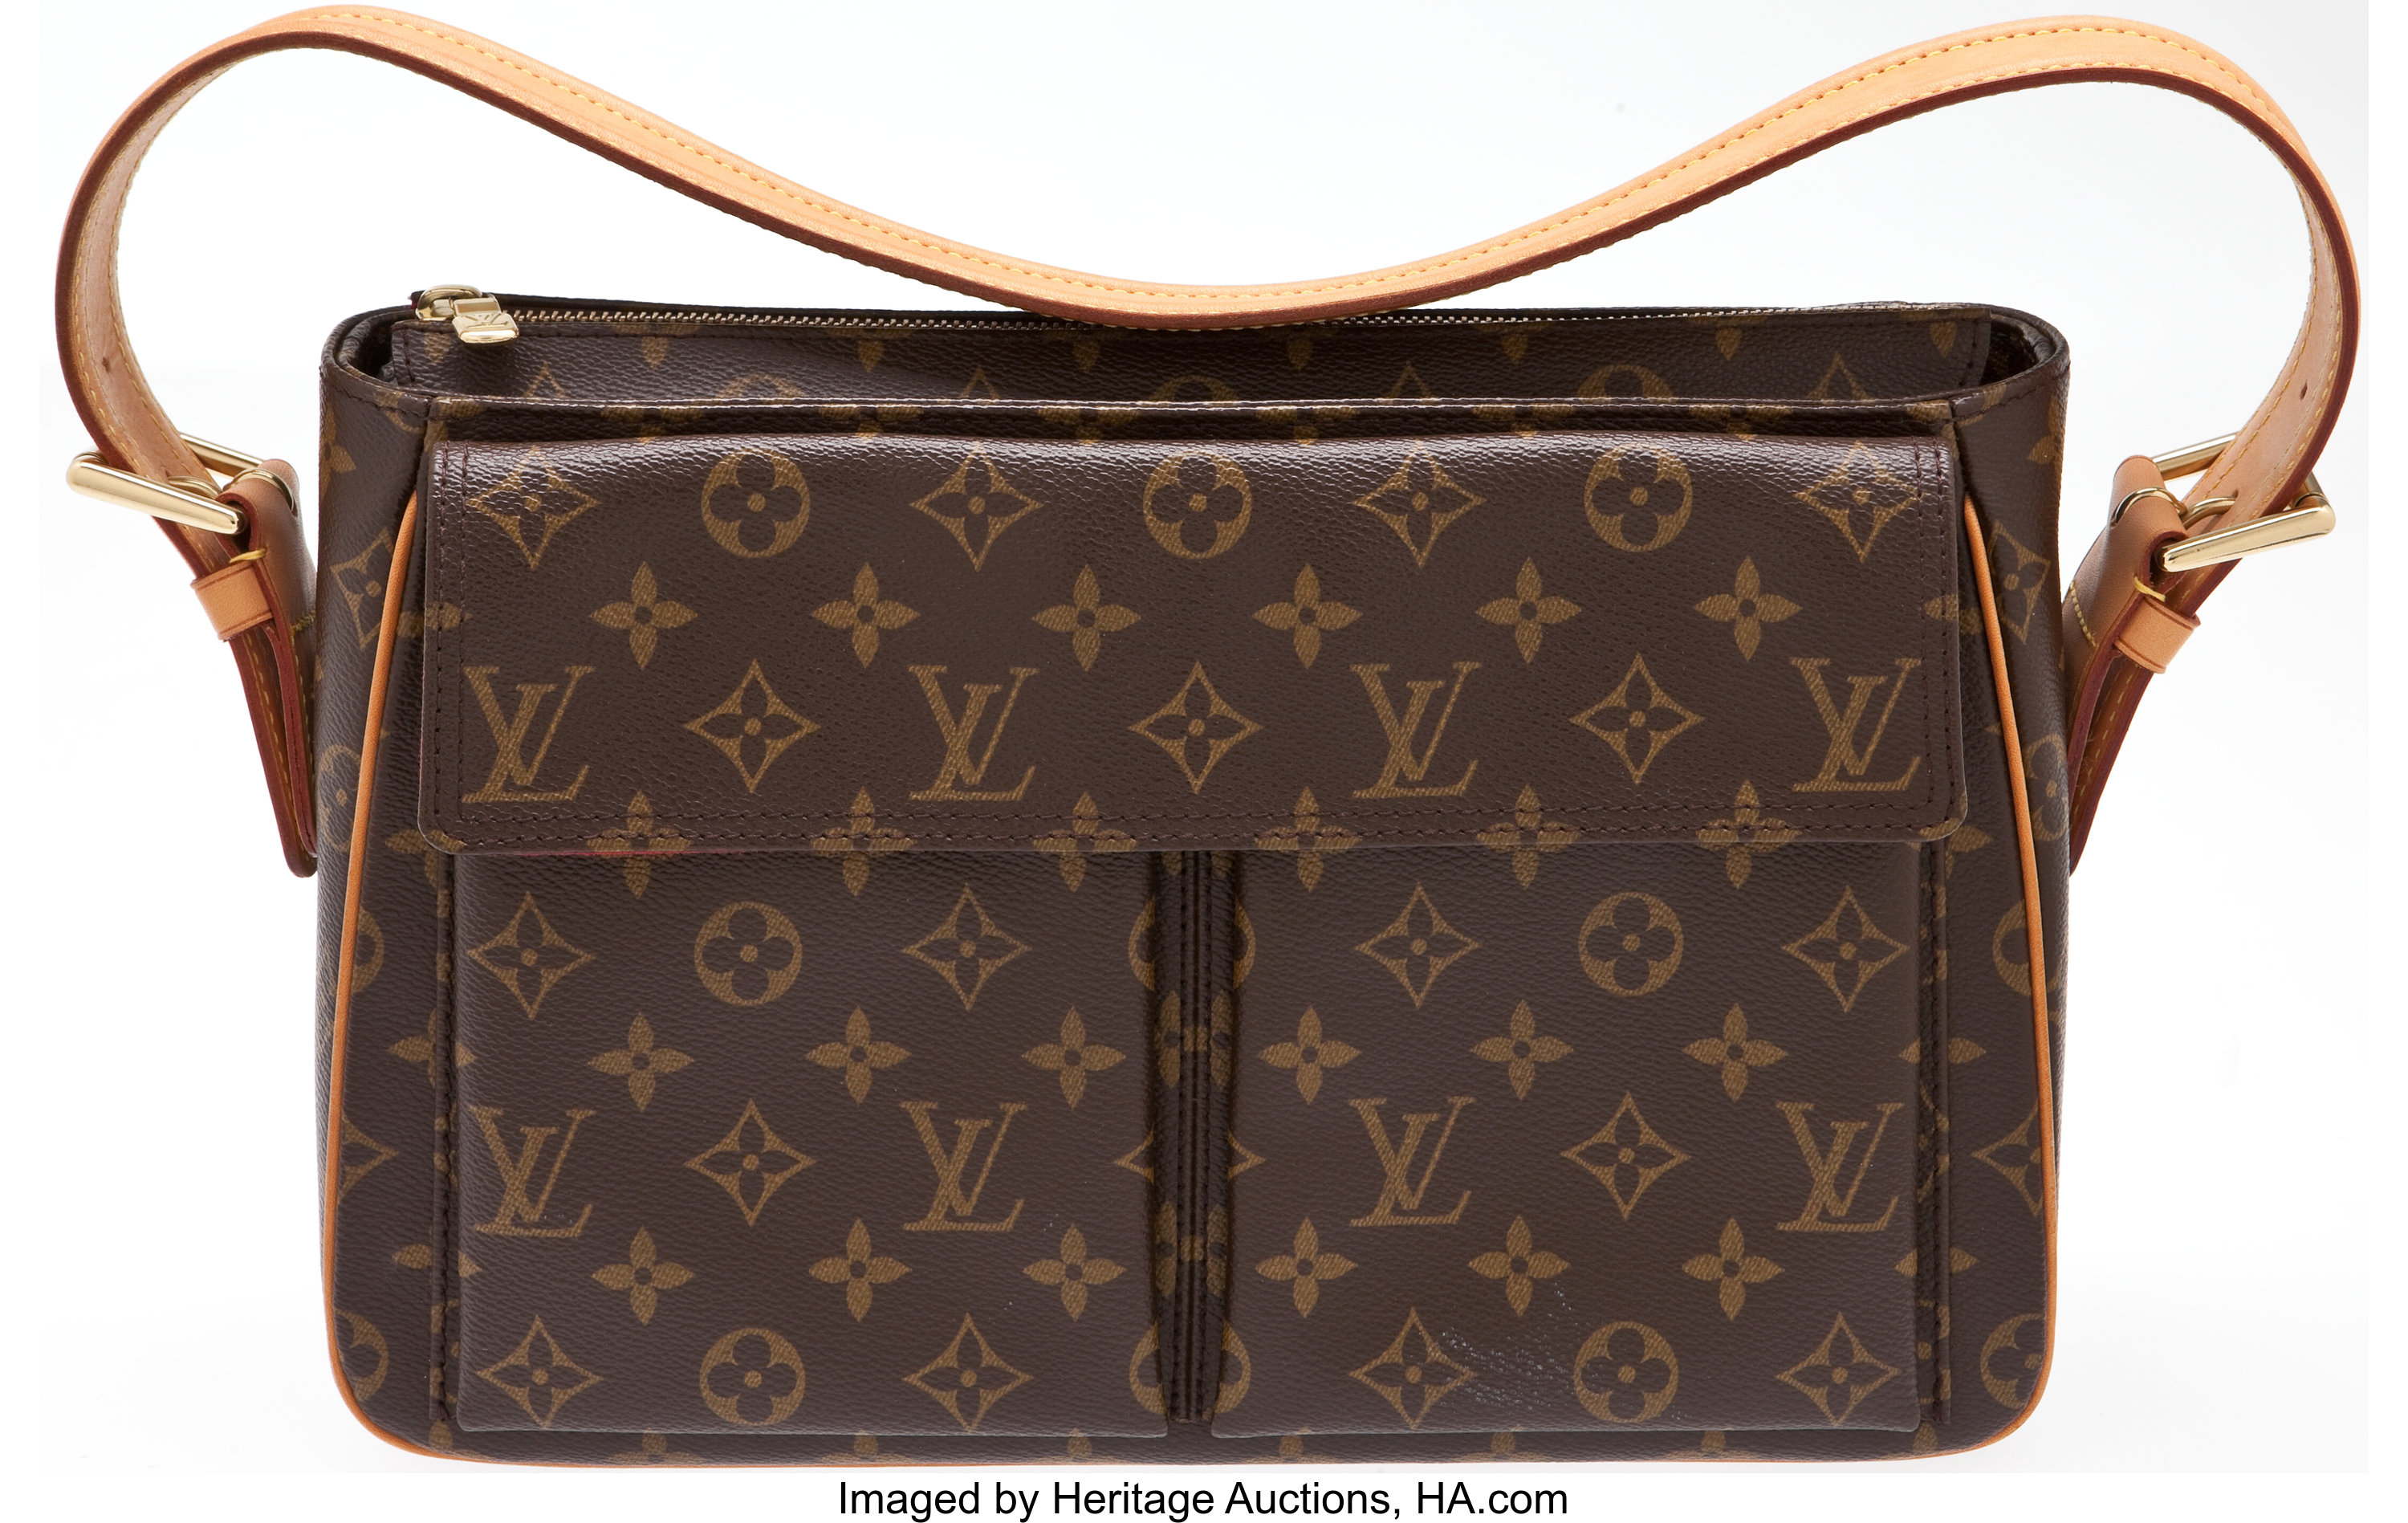 Sold at Auction: Vintage Louis Vuitton monogram tote, having two